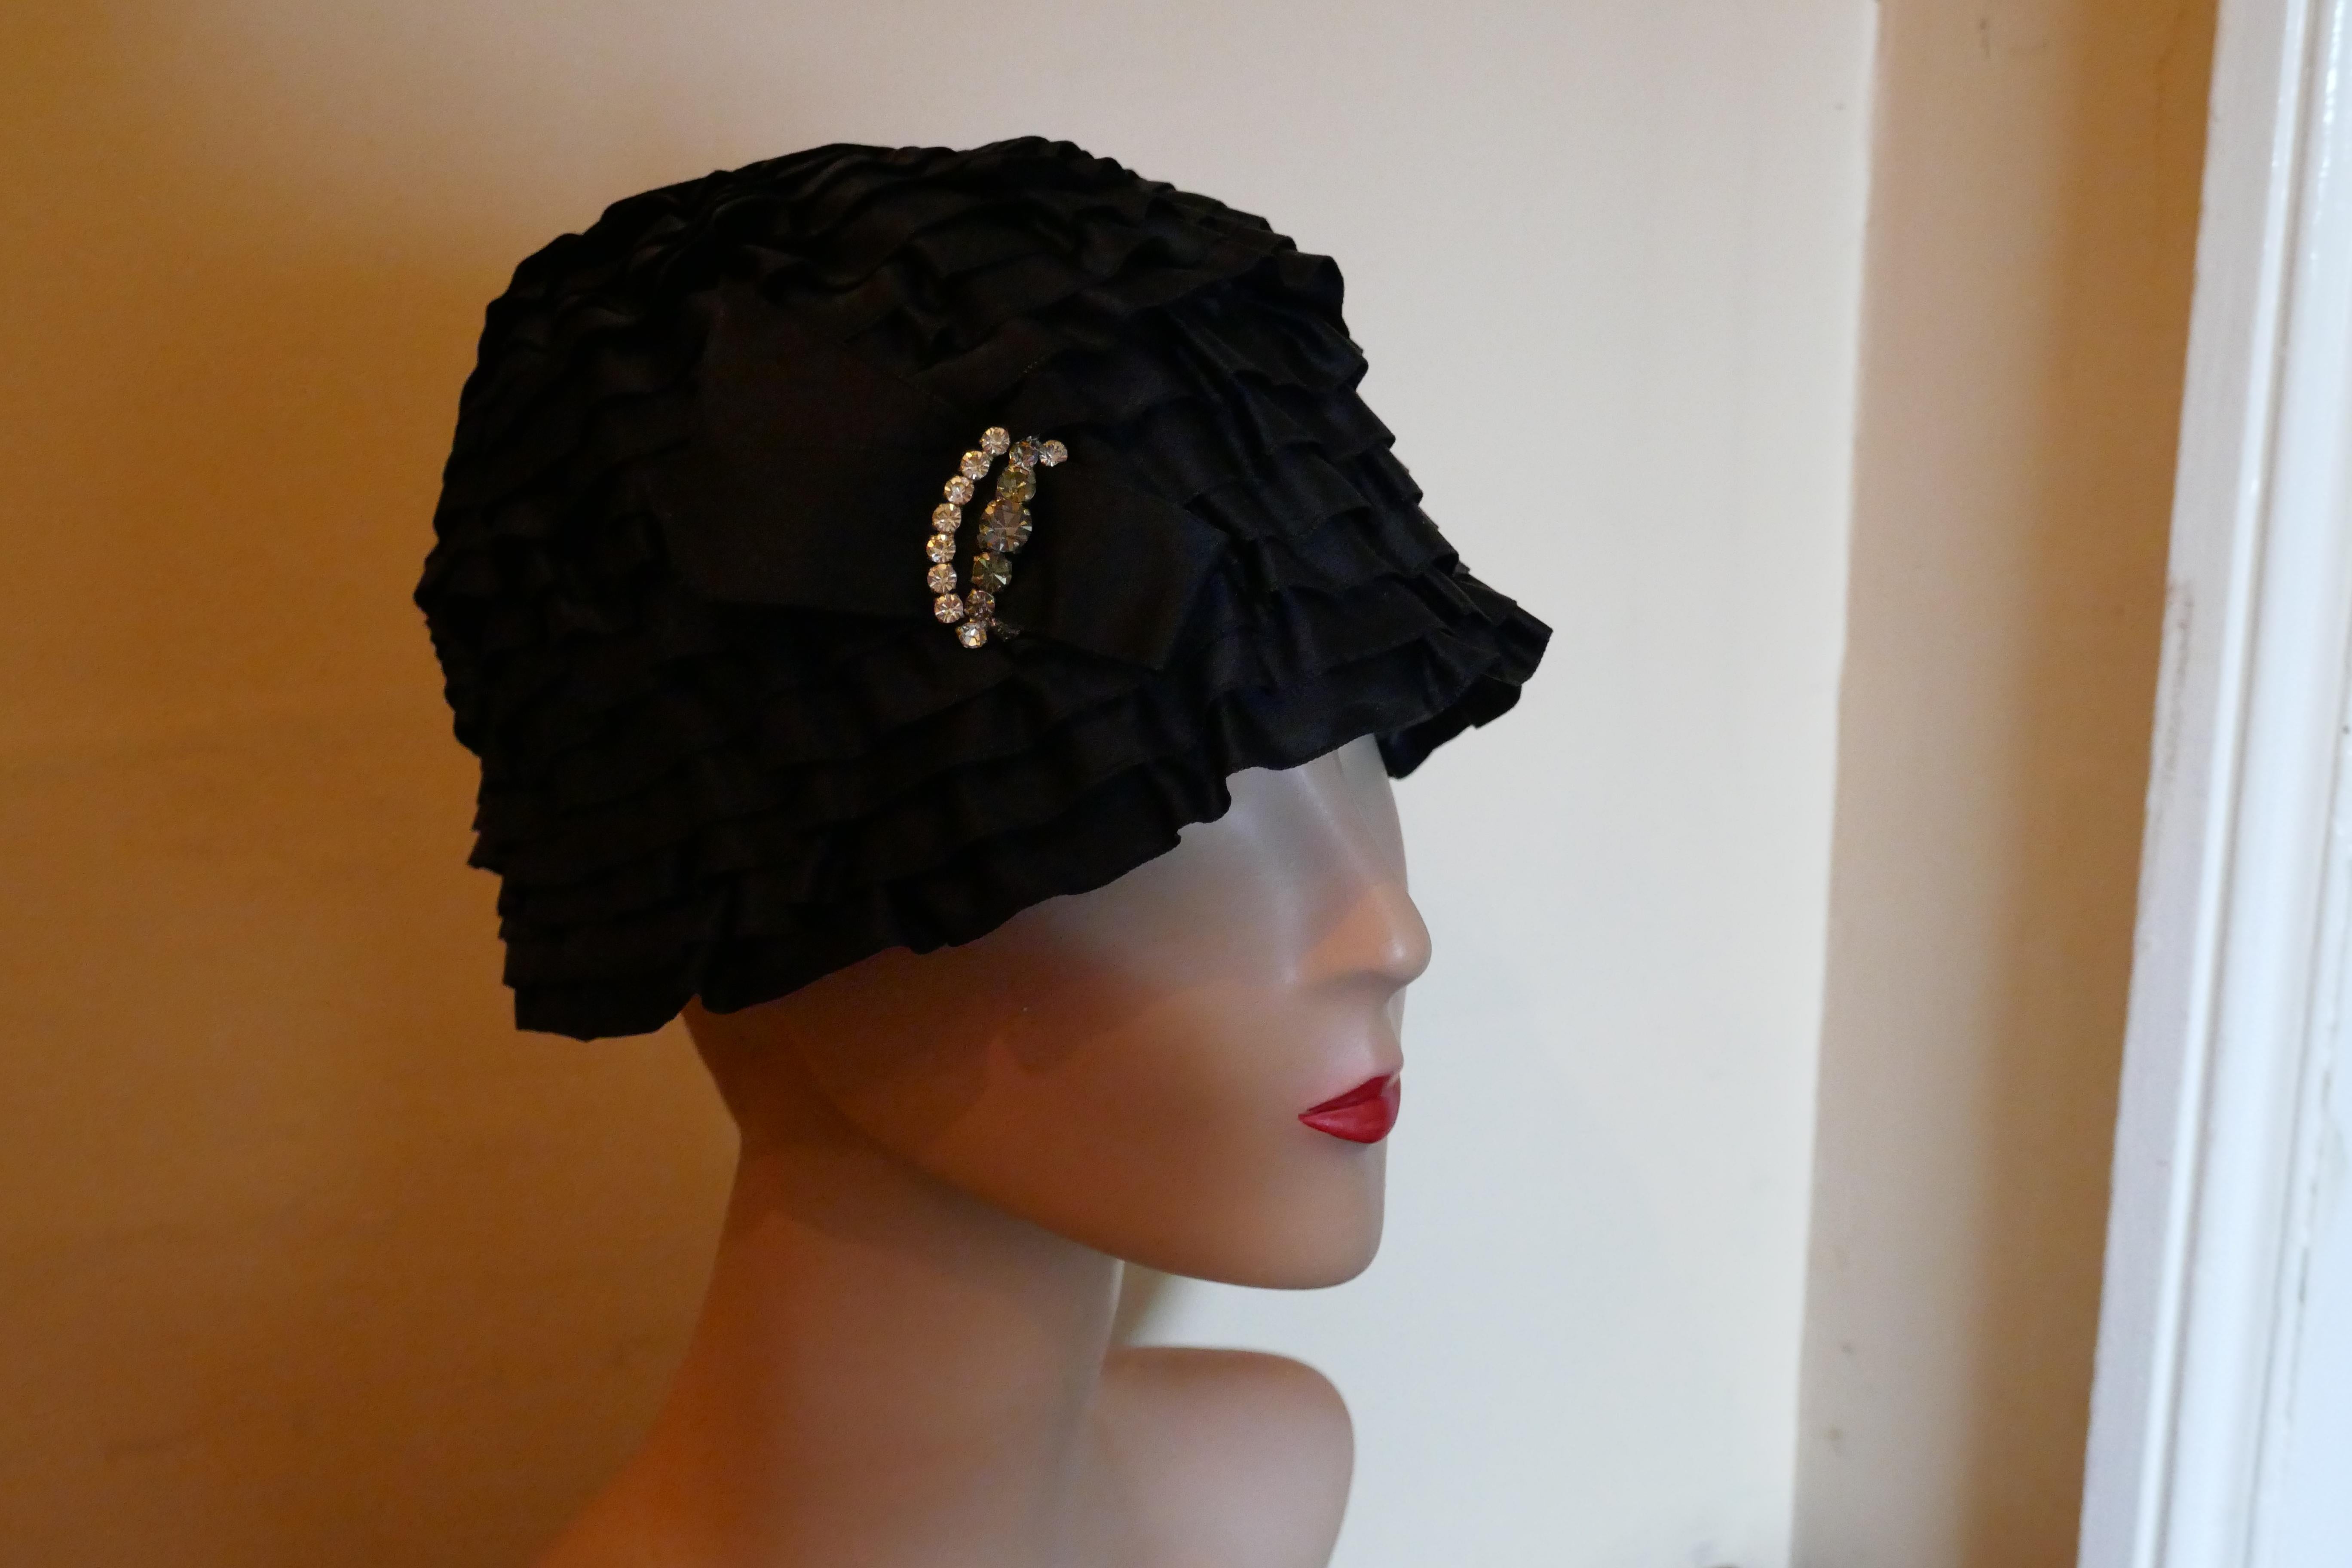 920’s Tight Fitting Black Satin Evening Hat By Dolores of London and Paris 

Roaring ‘20s Flapper Close Fitting Satin Ribbon Evening Cloche Hat, by Delores London and Paris  

Absolute fun, this is a close fitting hat made on net with rows of